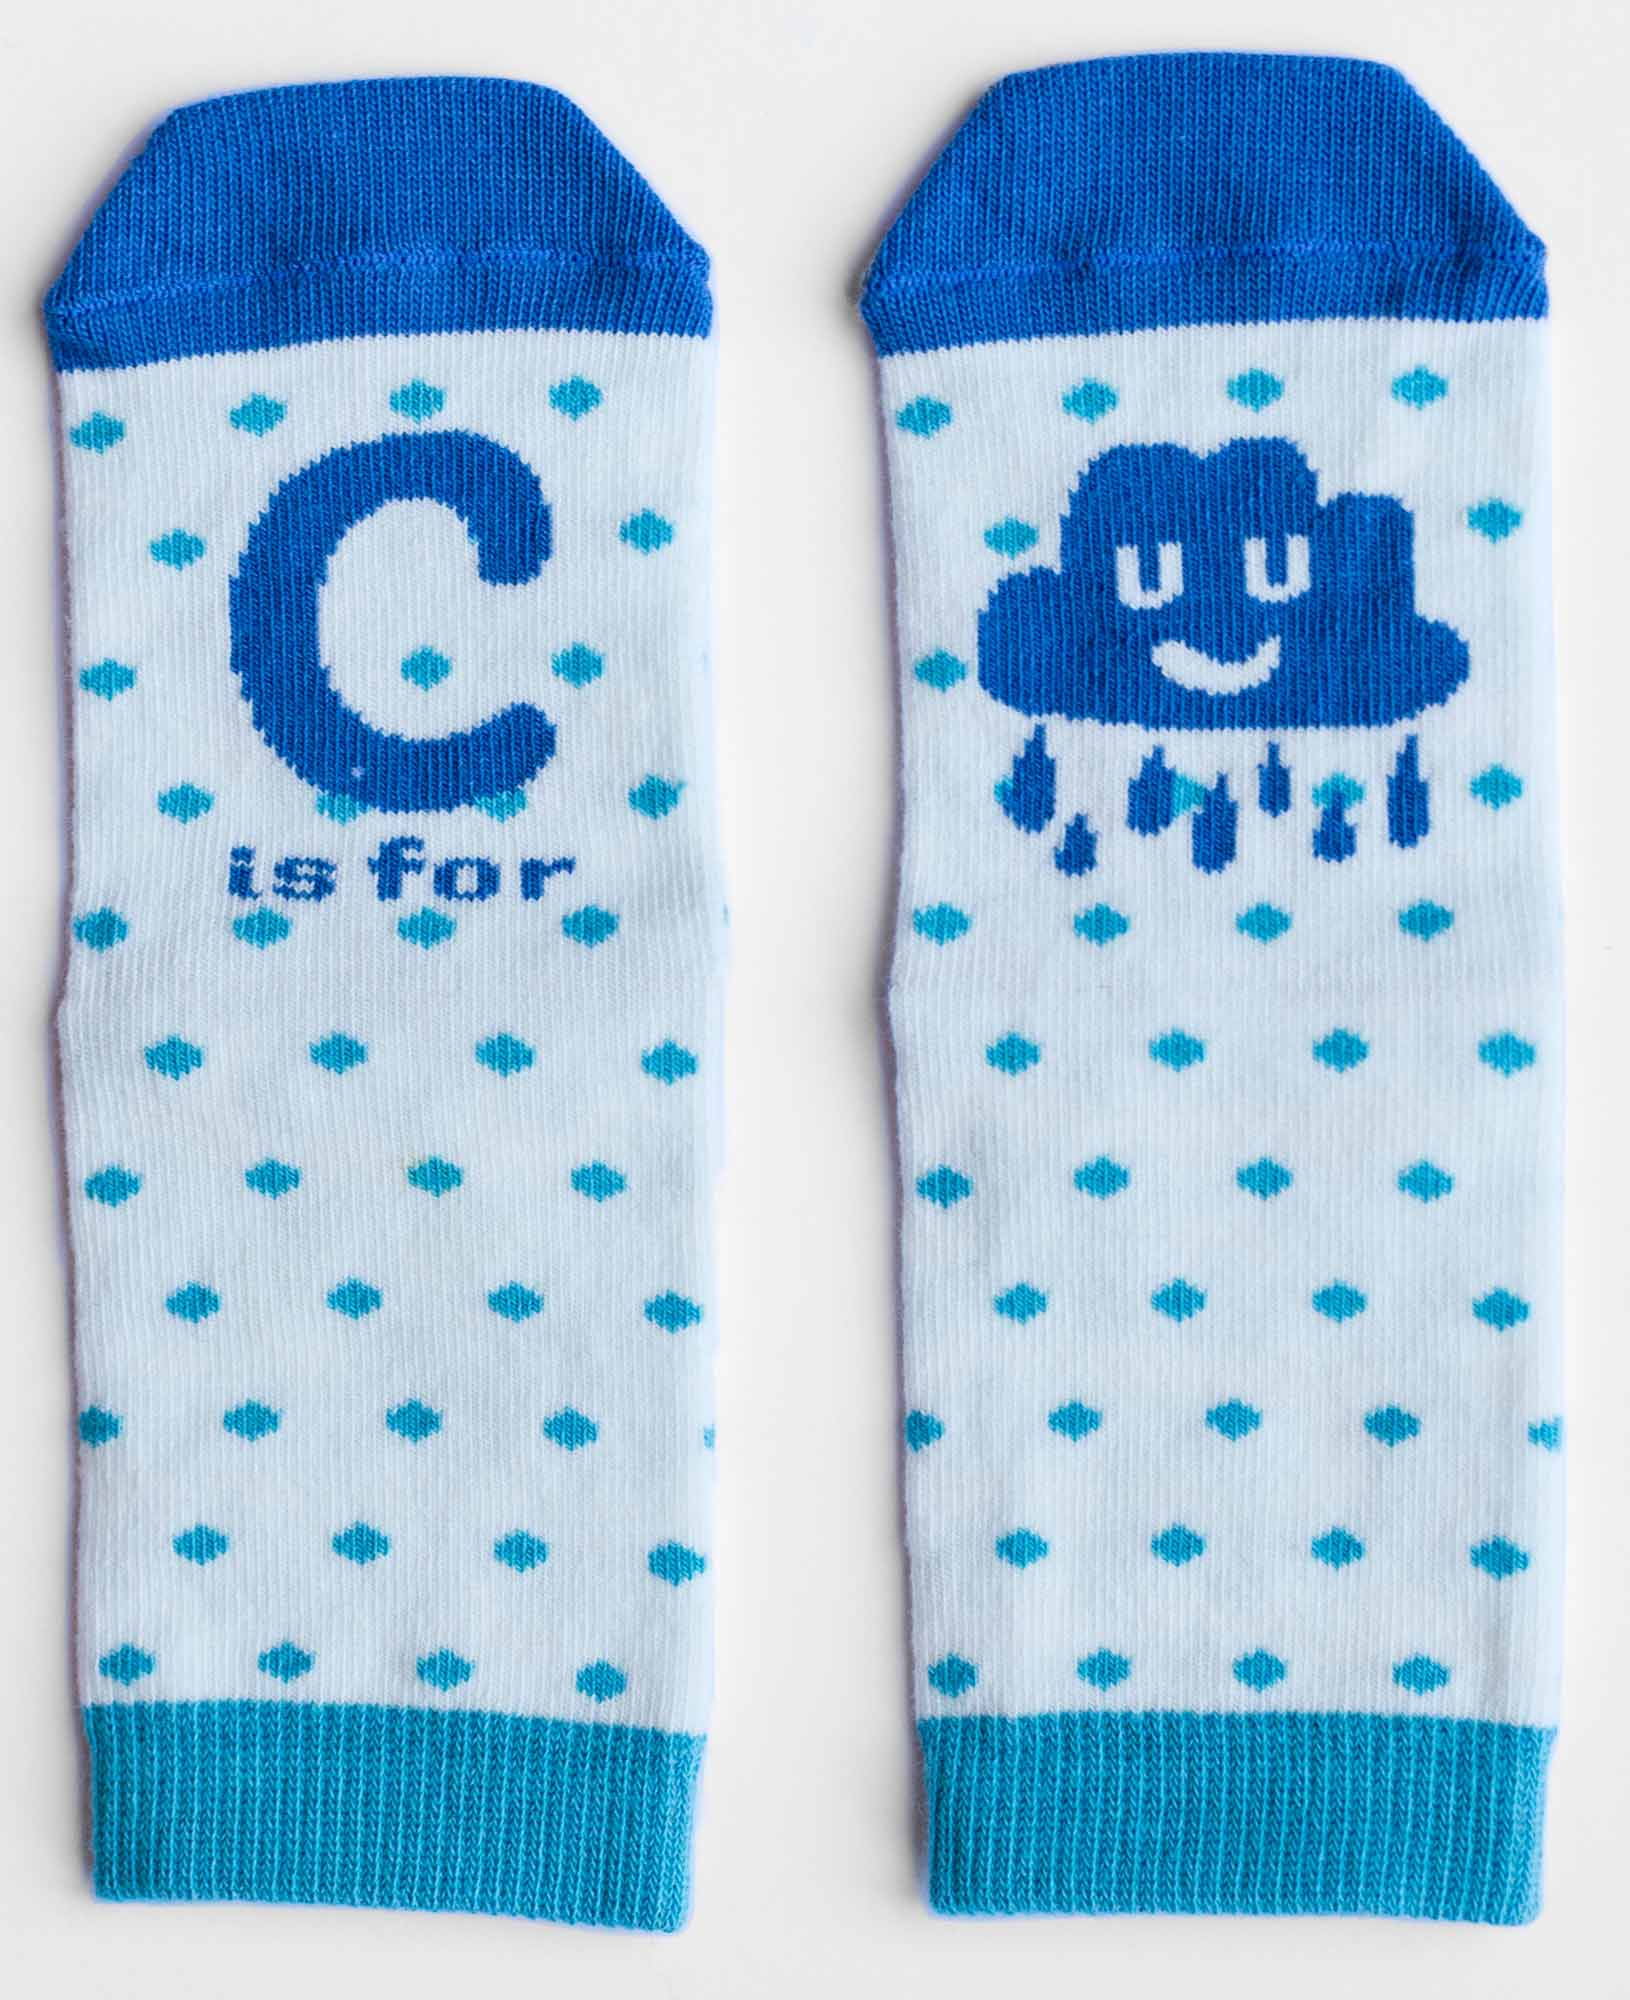 C is for Cloud sock by Elly Jahnz for Socks and Stripes